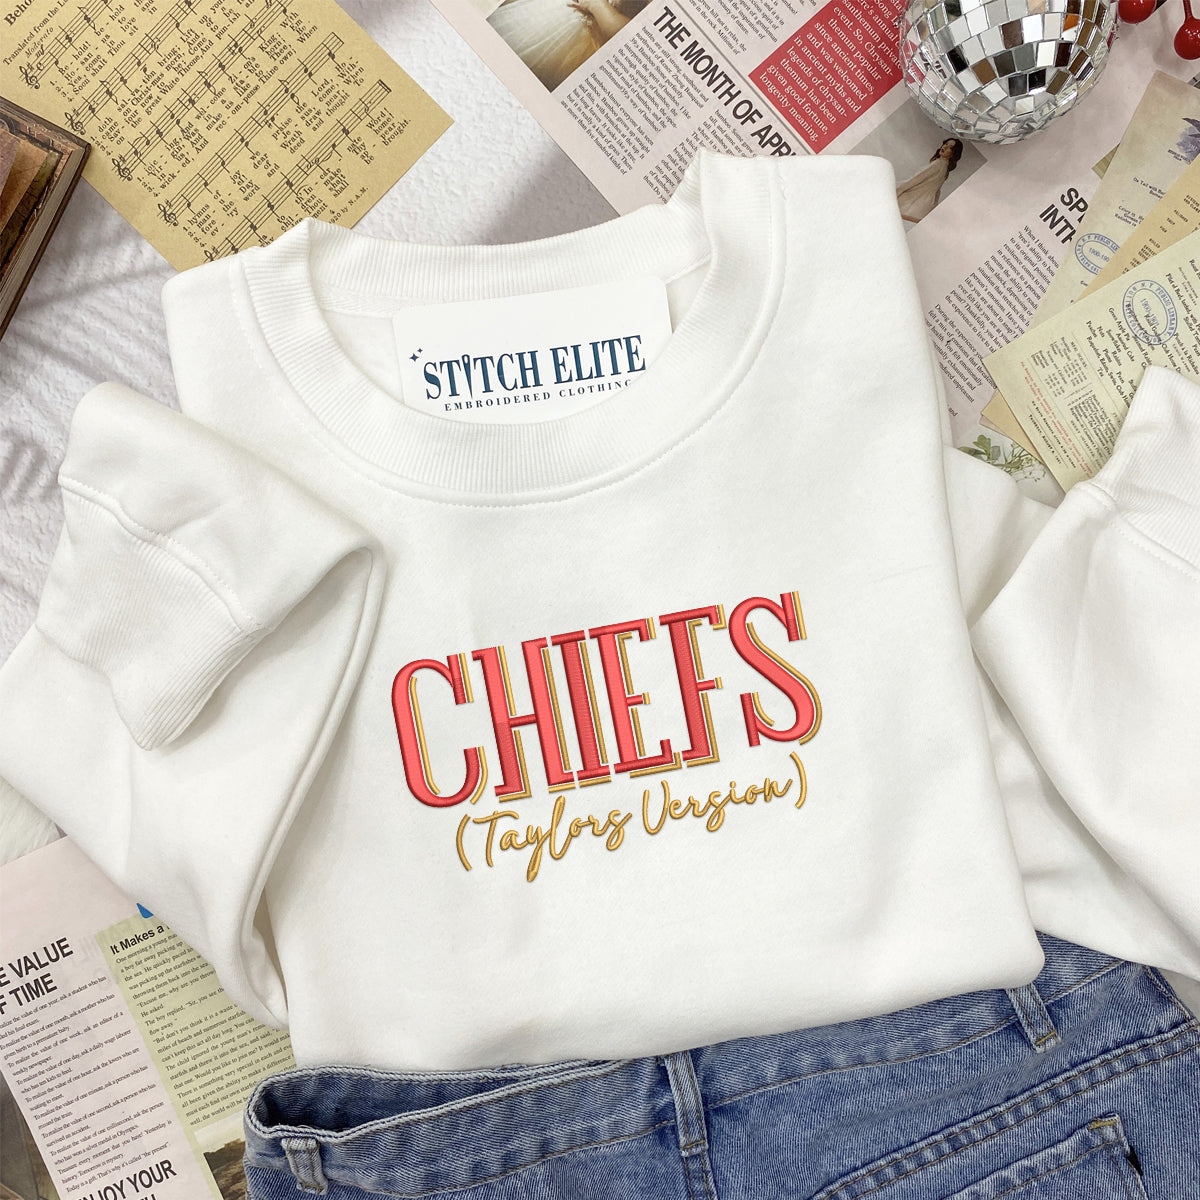 chiefs taylor embroidered apparel 1708416674875.jpg